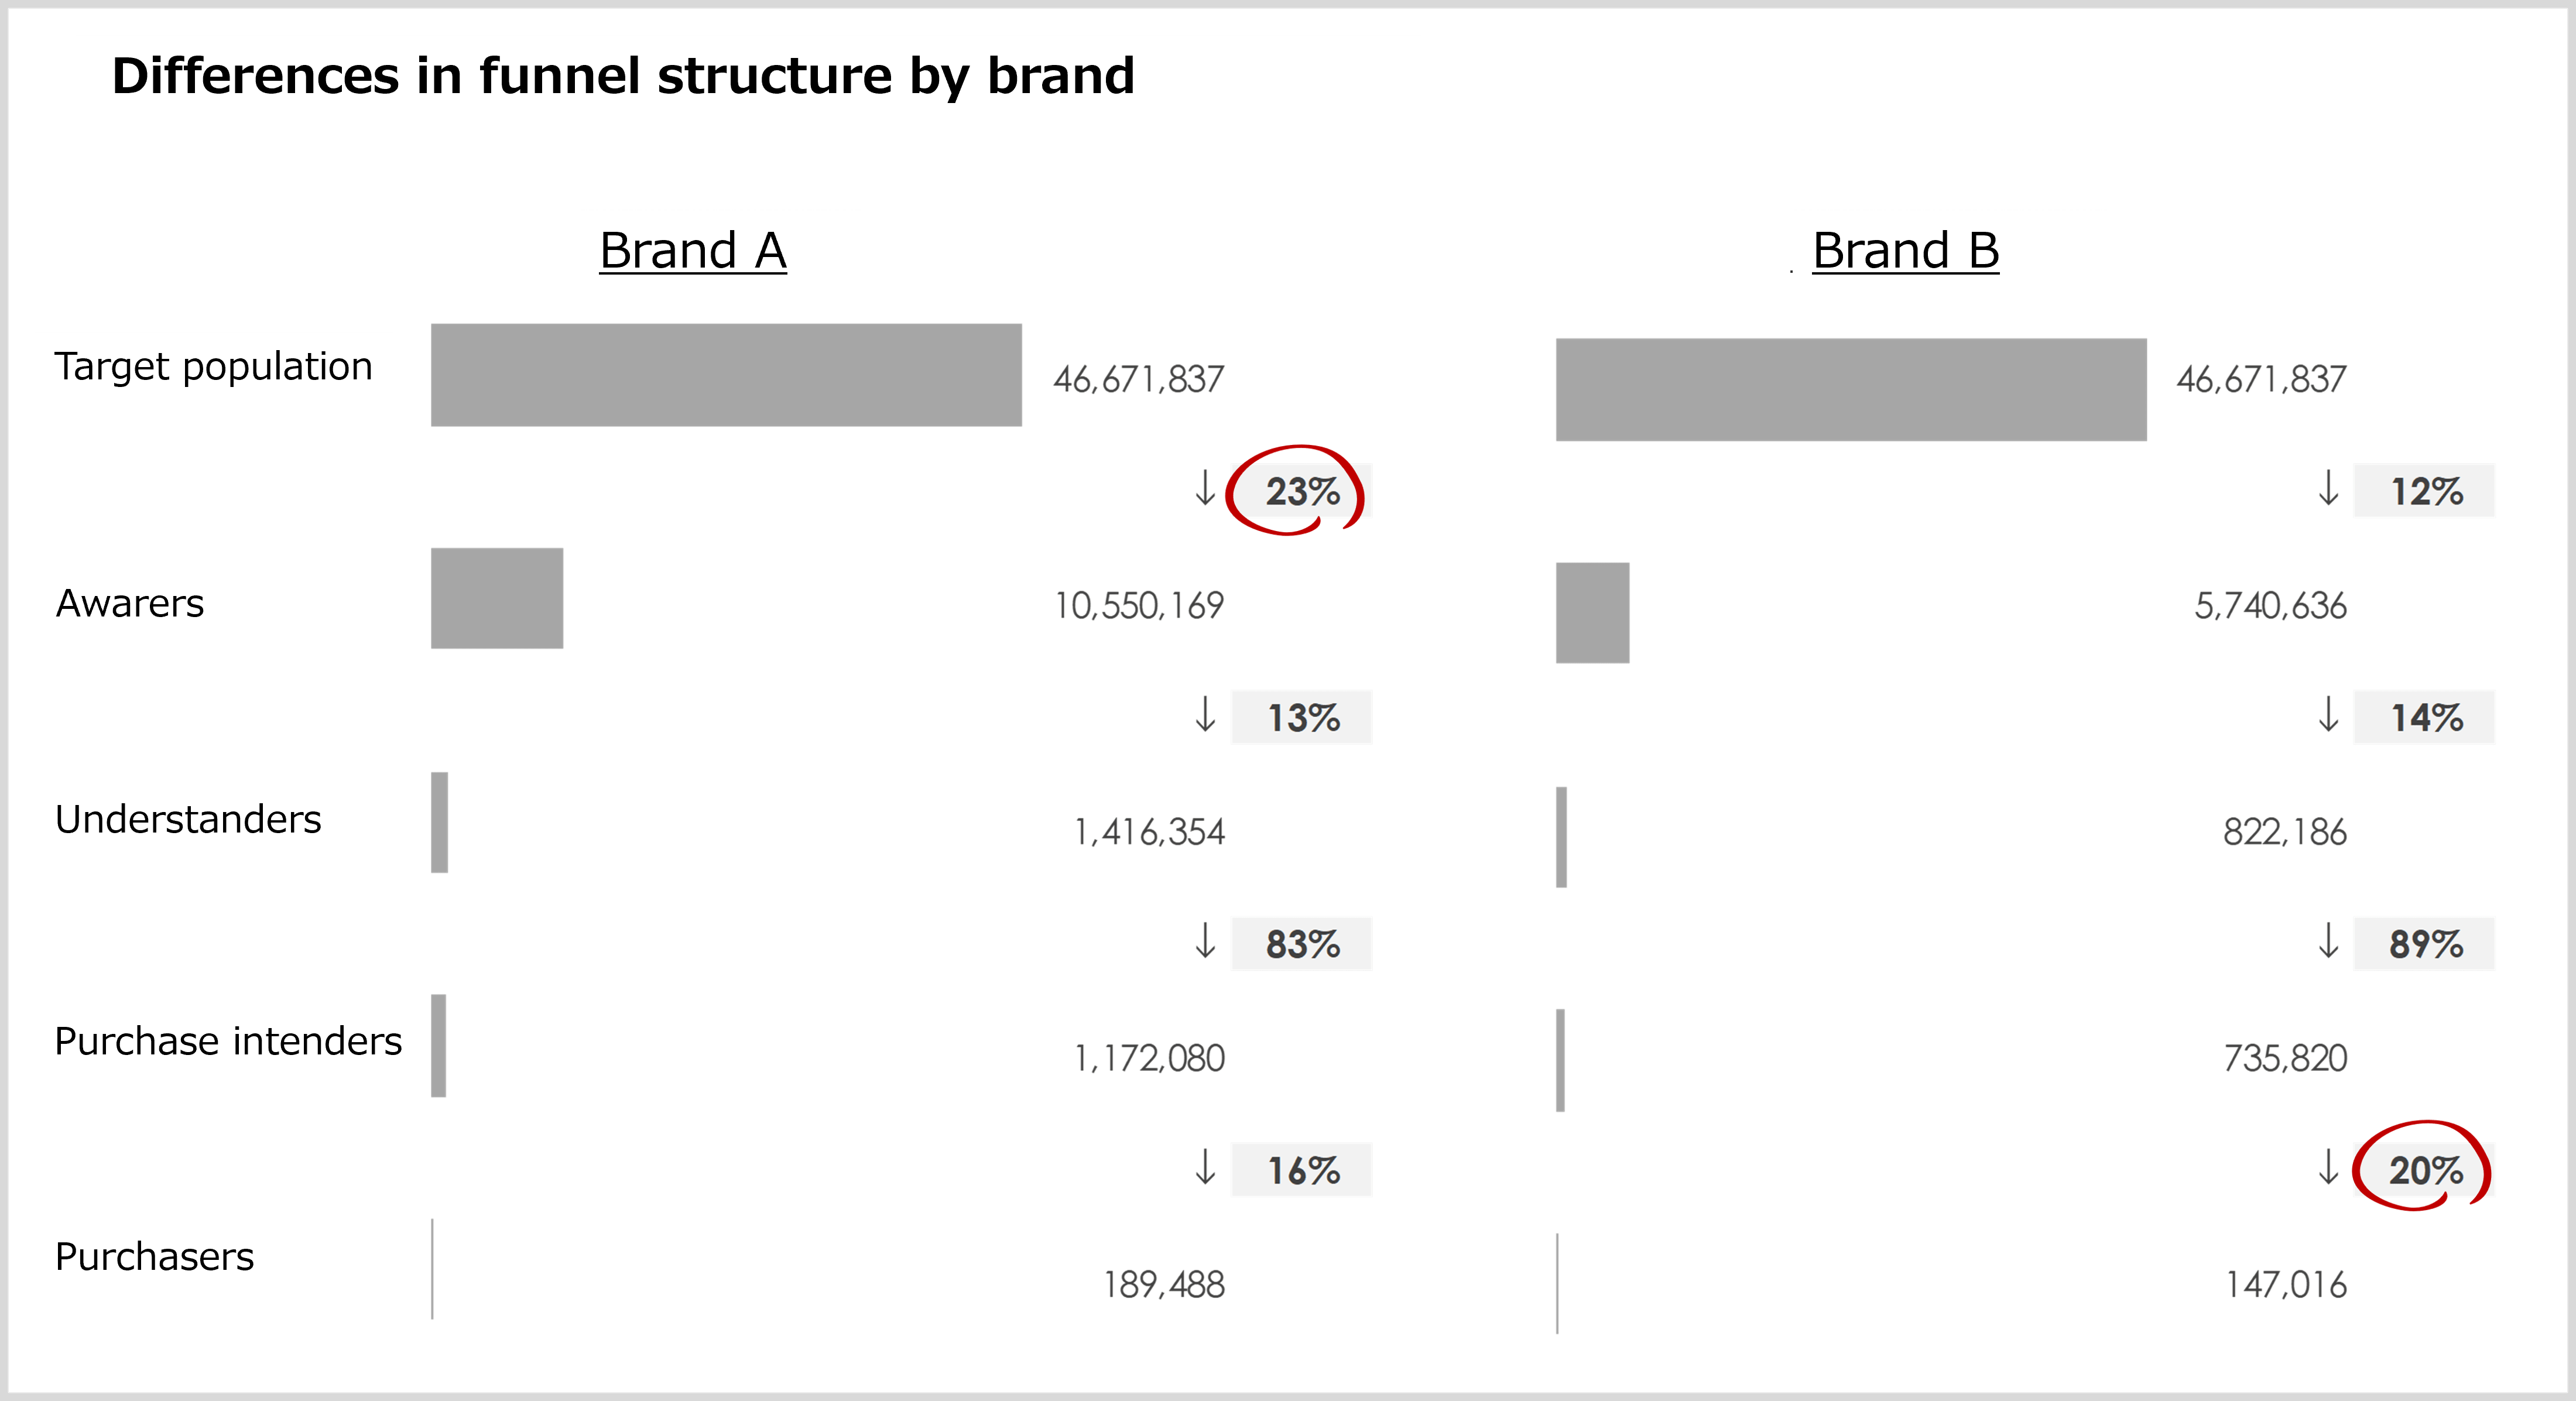 Difference in funnel structure by brand